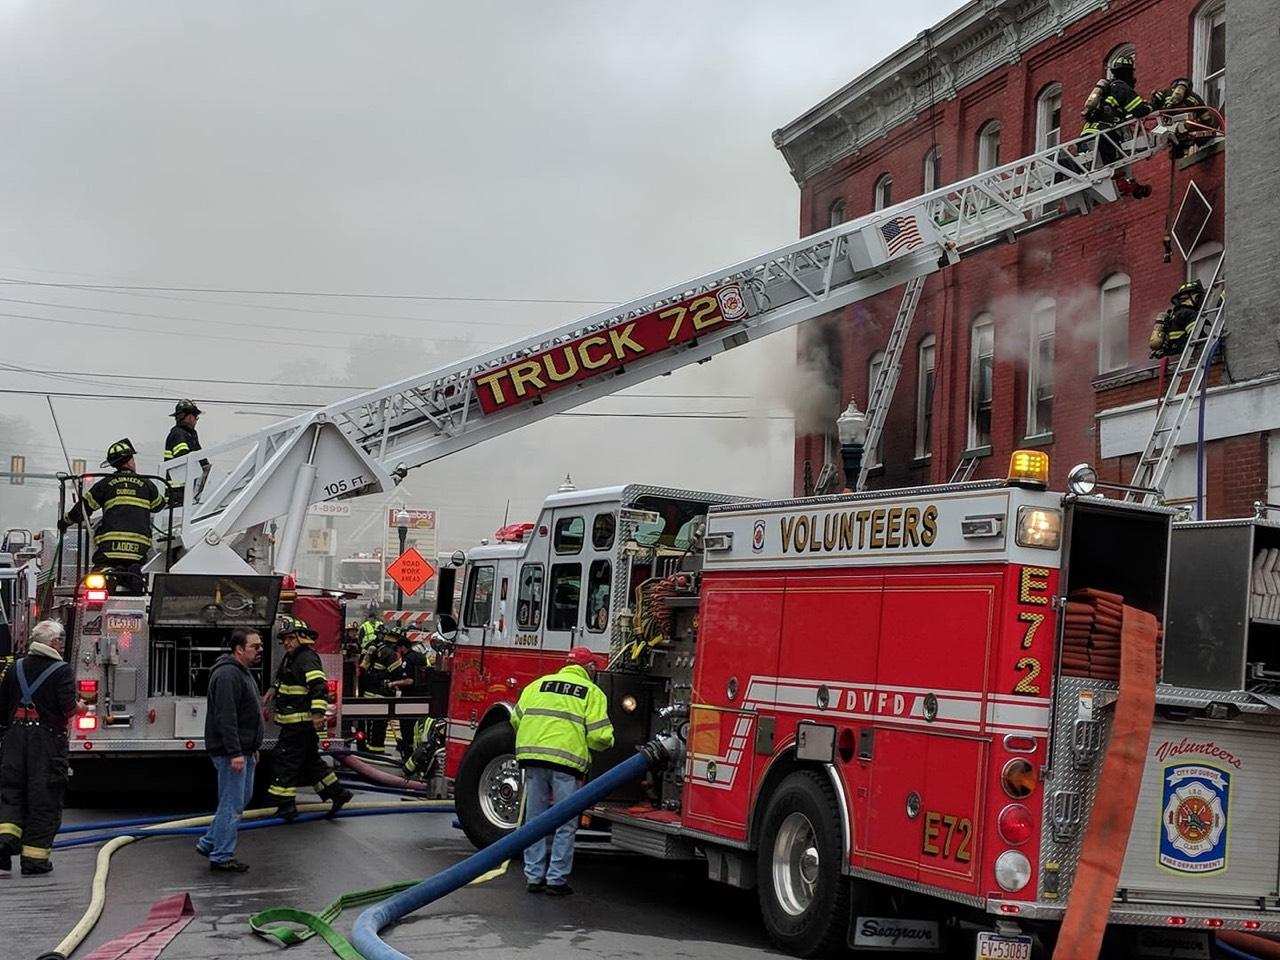 Fire fighters from the DuBois Volunteer Fire Department make entry into a multi-tenant building at 322 W. Long Avenue. An early morning fire forced the evacuation of residents of several apartments inside the building. All residents were able to exit the building safely. (Photo submitted)